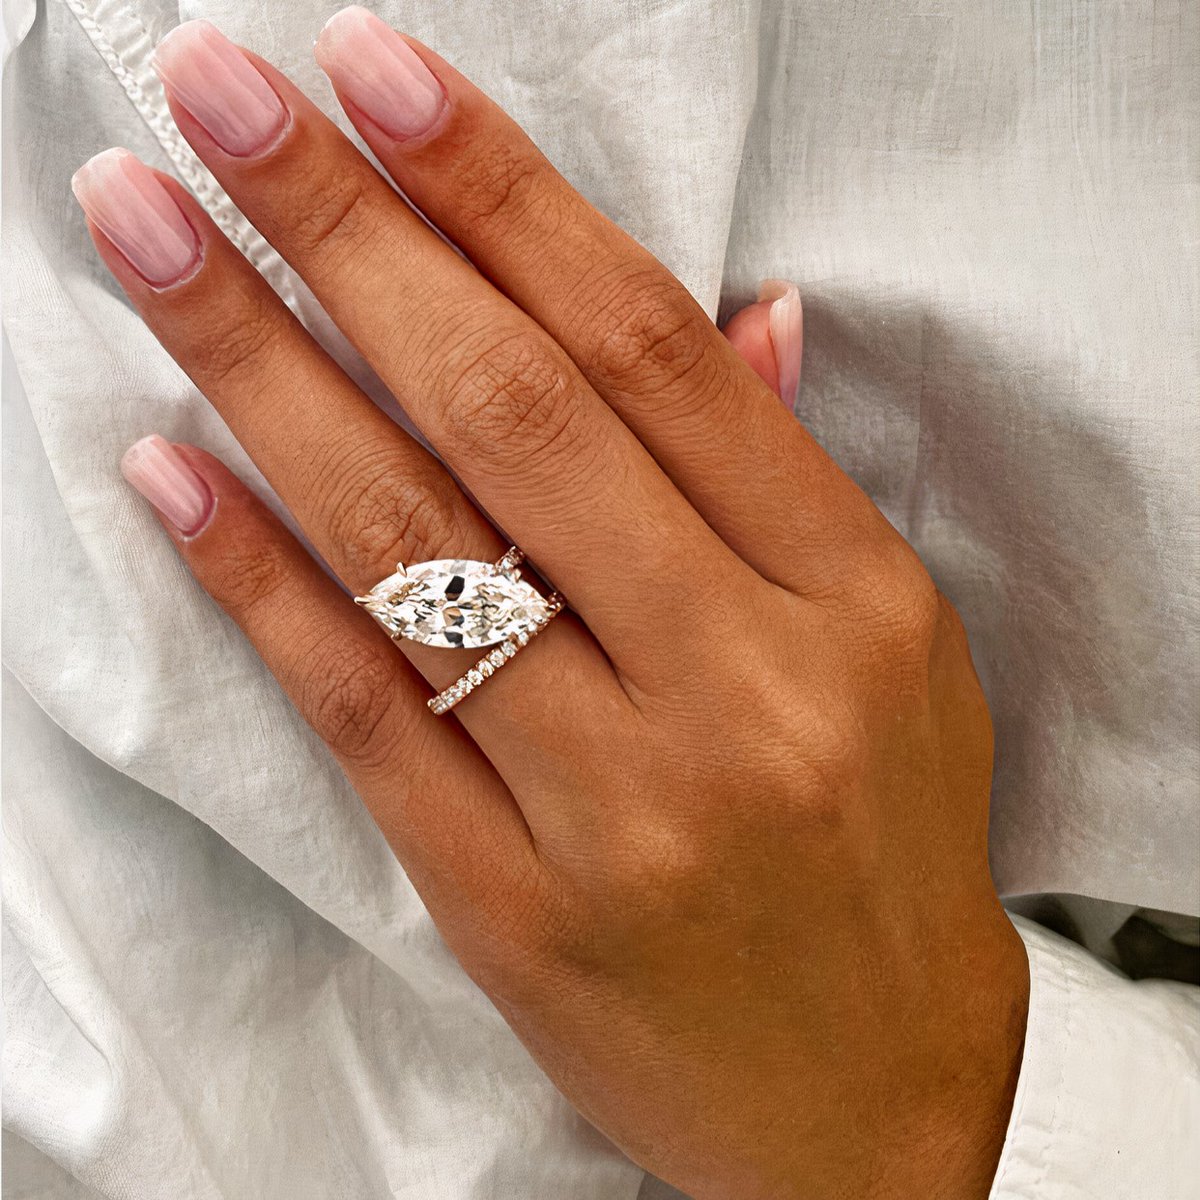 Marquise diamonds are the perfect blend of classic and contemporary styles💫
.
.
#trendyring #goldringsforwomen #bridalset #goldjewelry #thinweddingband #diamondjewelry #diamonddealer #labdiamondring #diamondring #marquisering #uniquering